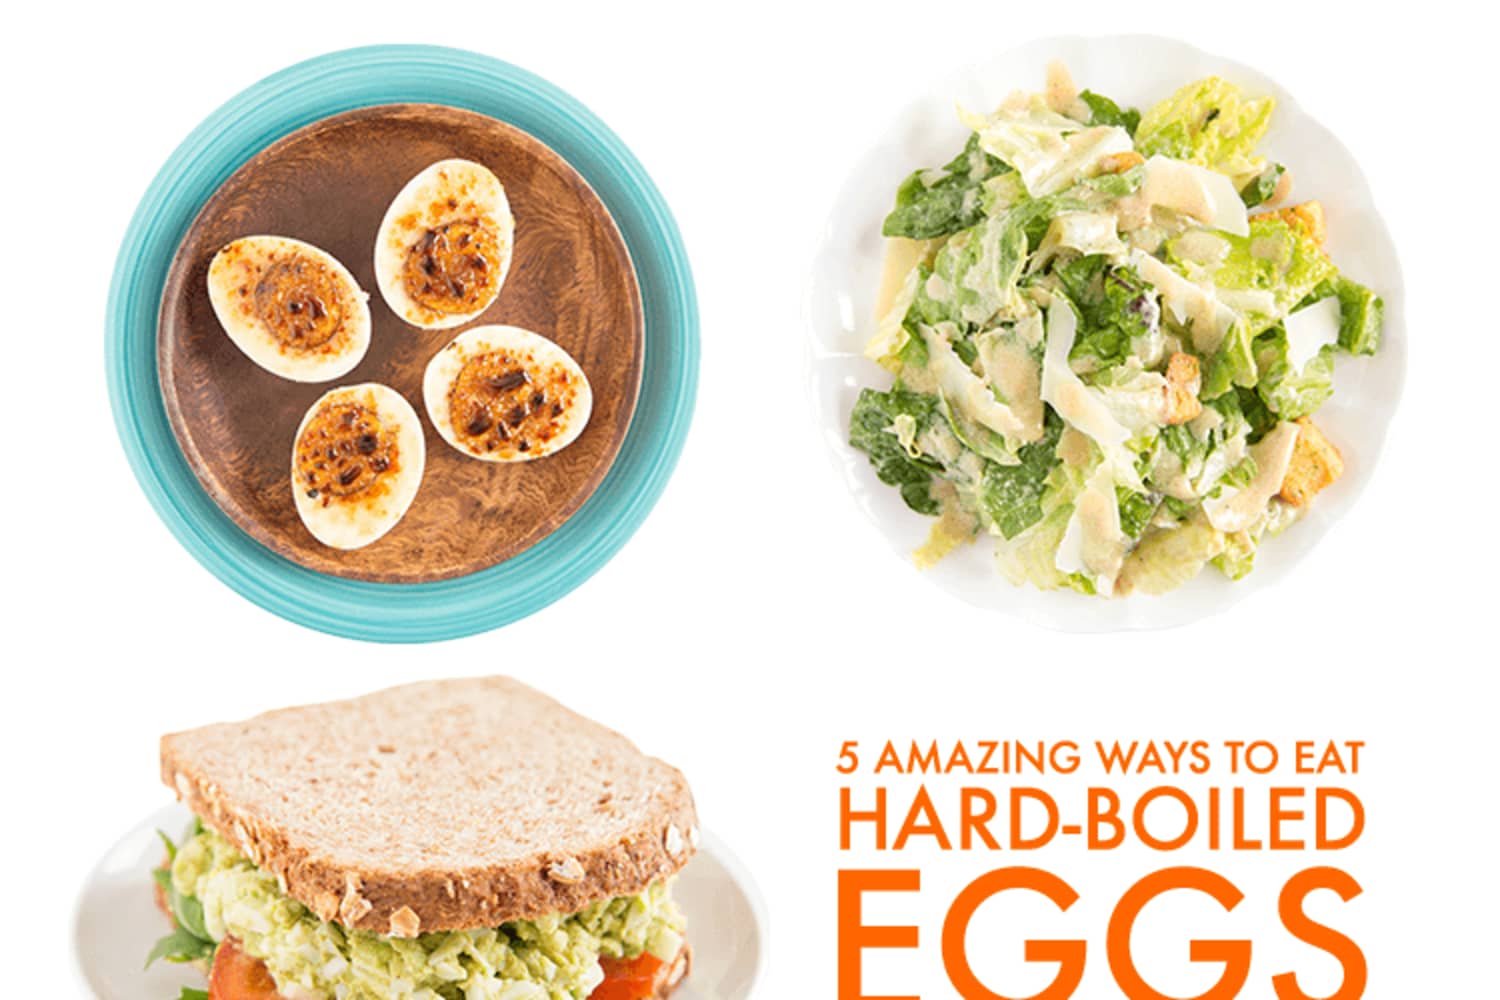 What to Put on Hard-Boiled Eggs